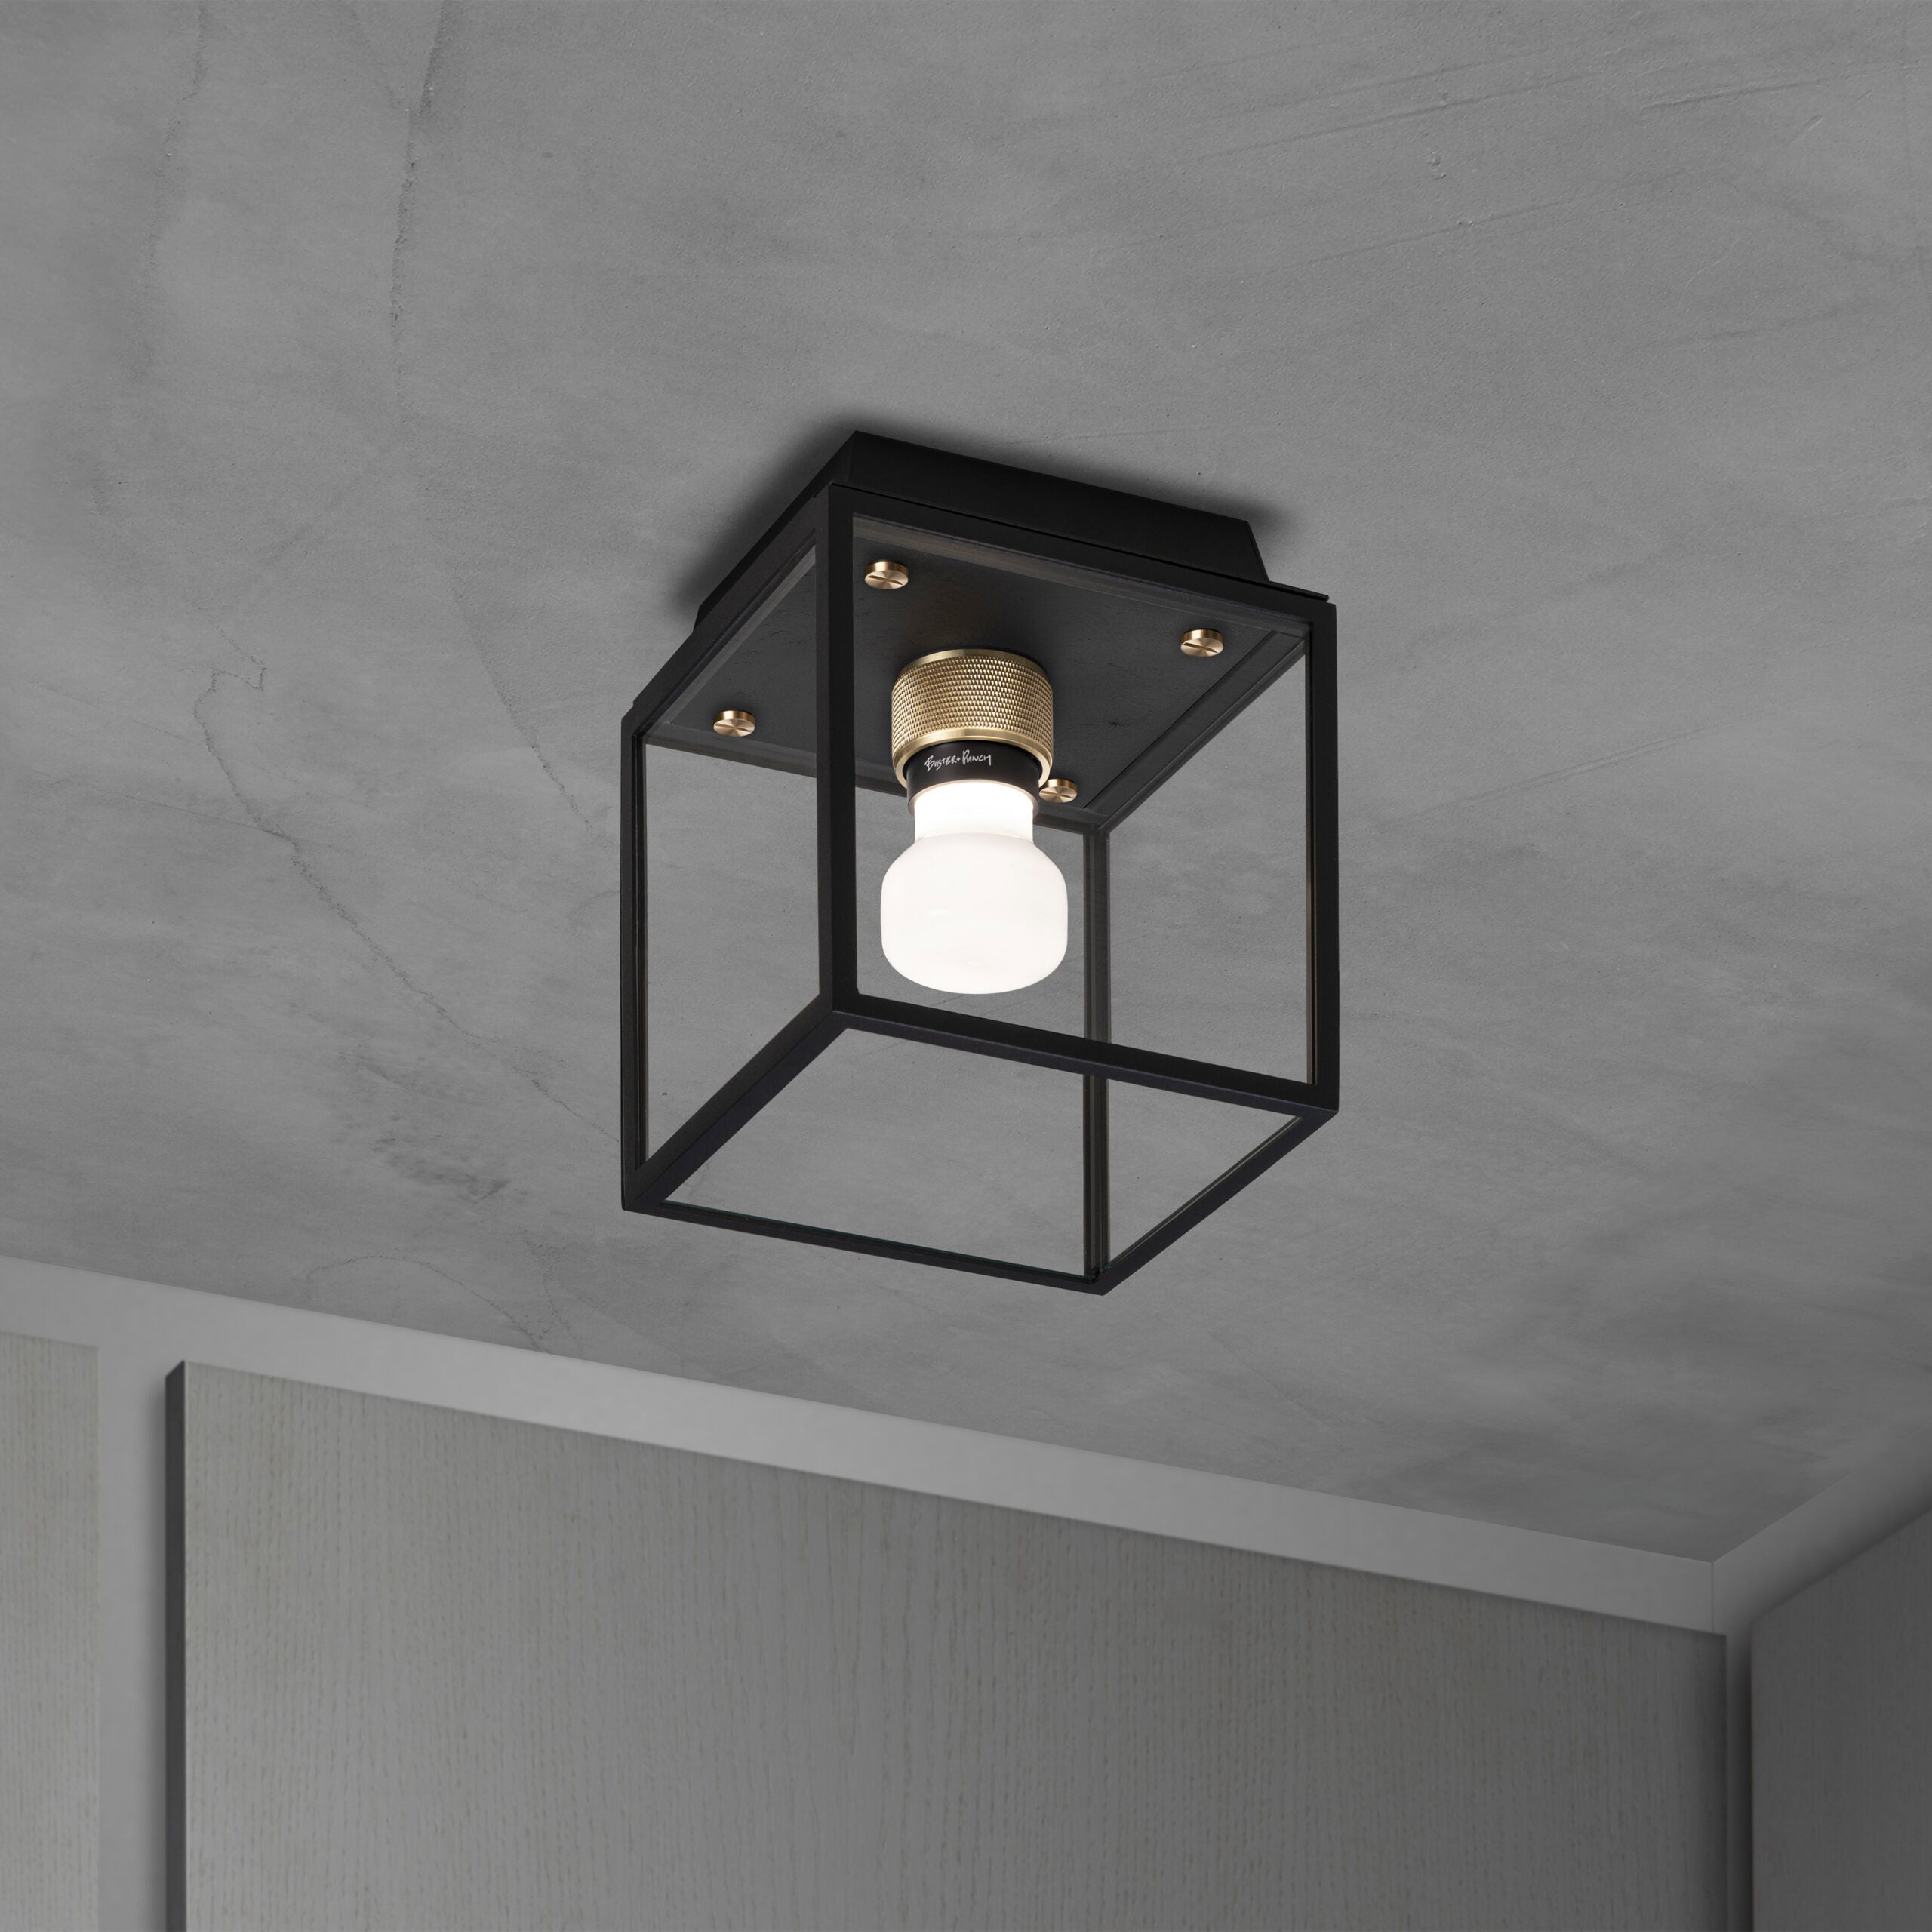 Buster + Punch - NCA-063538 - Caged Wet Ceiling Light - Caged Wet - Black / Brass